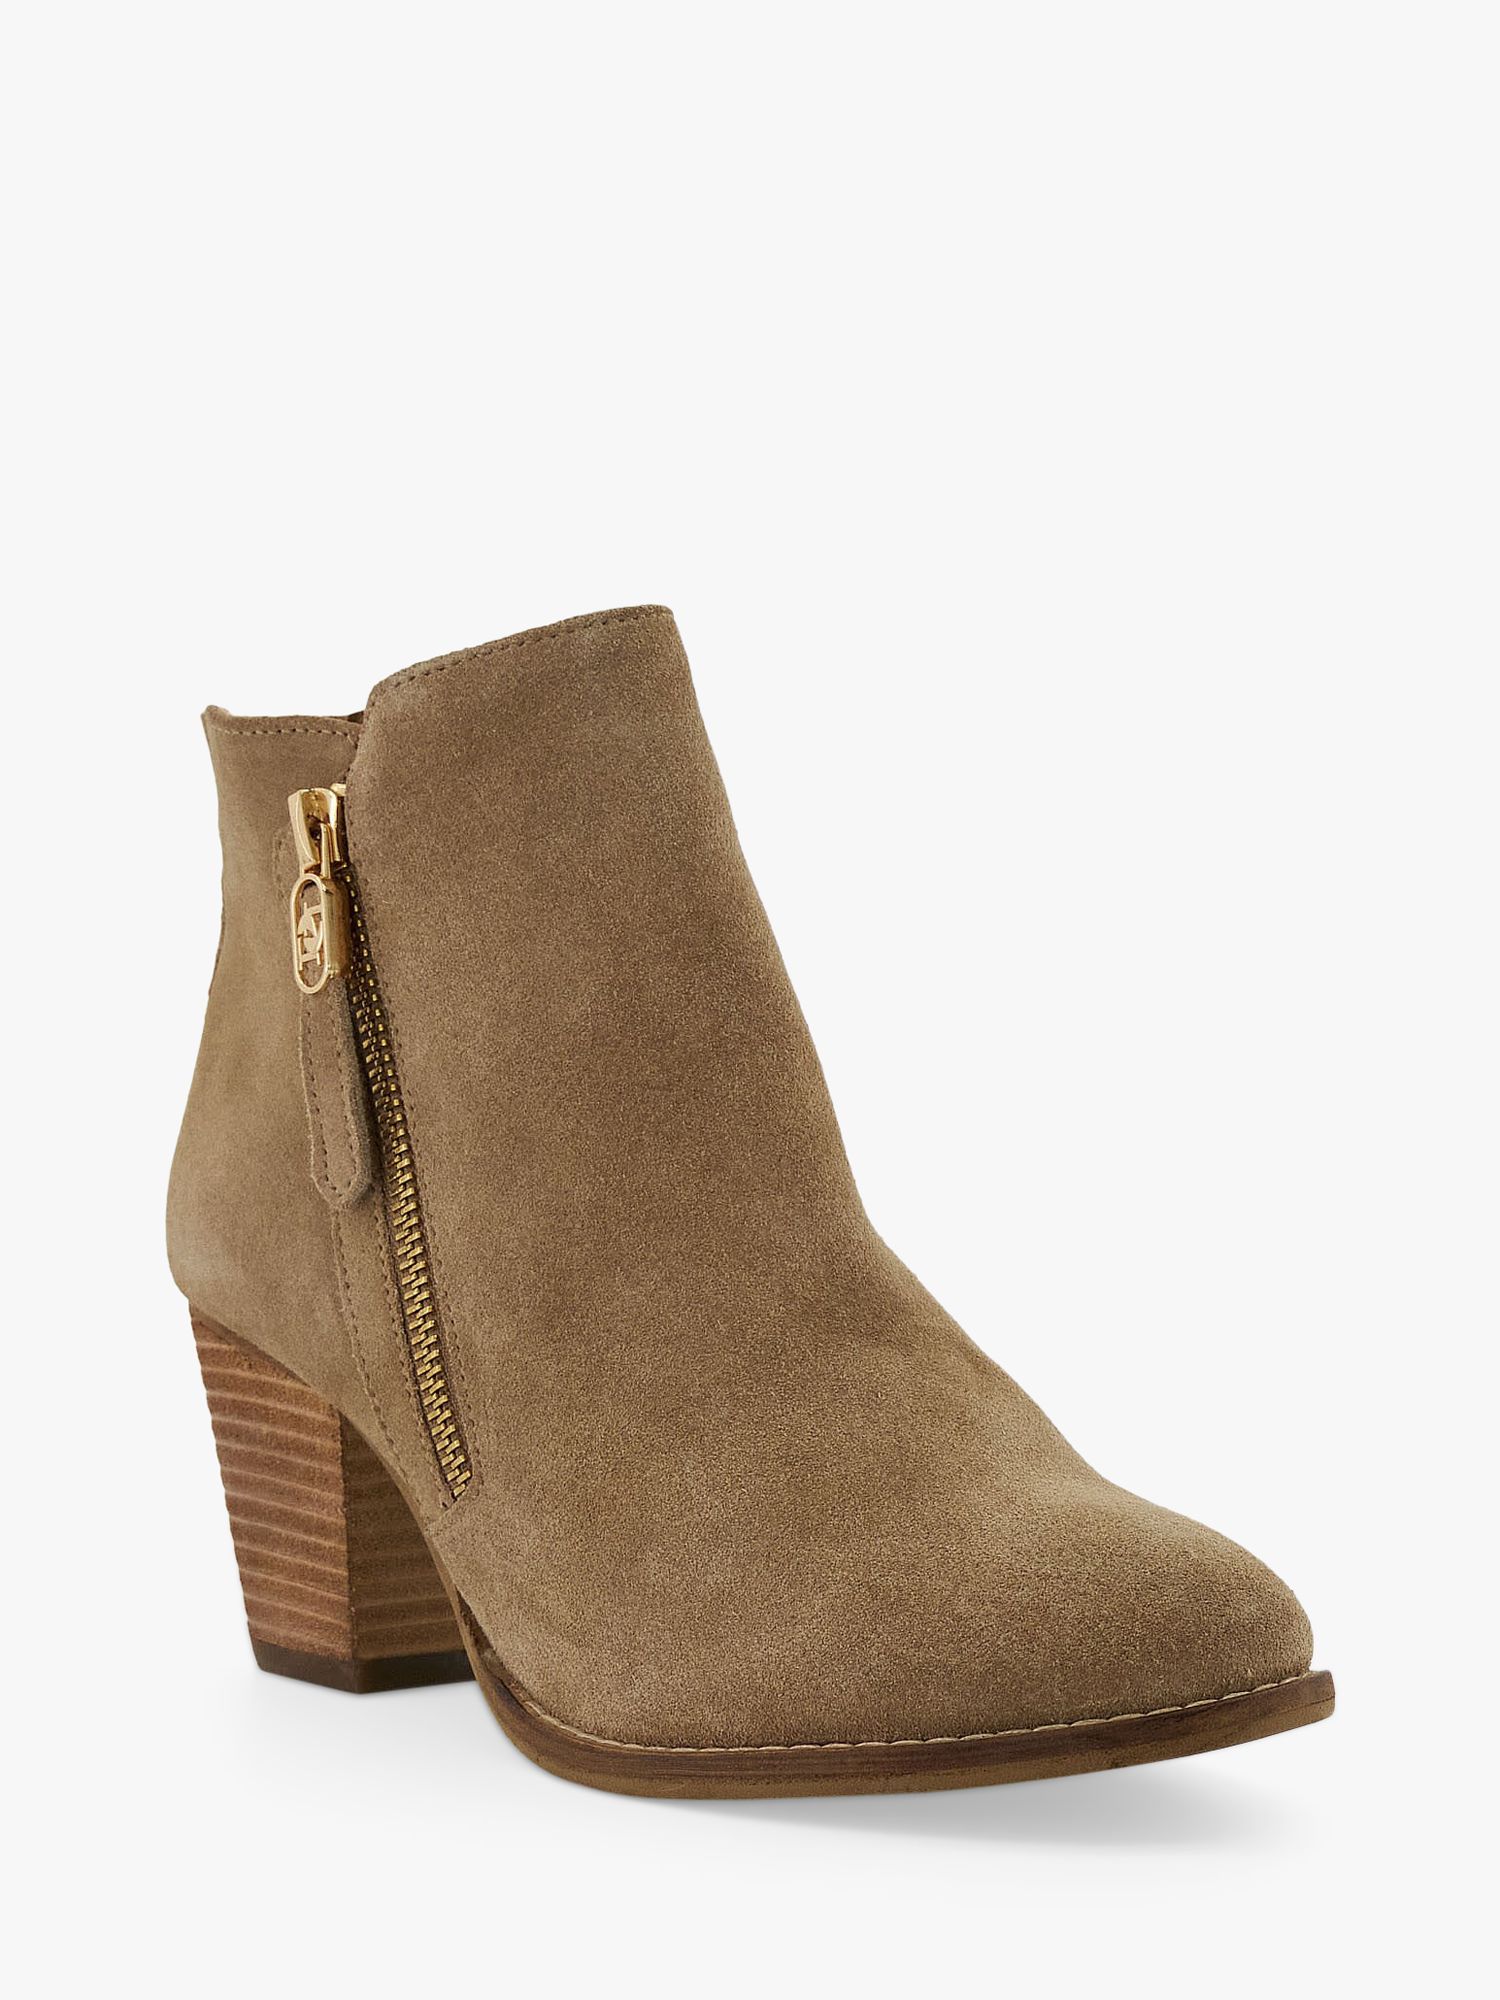 Buy Dune Paicey Suede Ankle Boots, Taupe Online at johnlewis.com